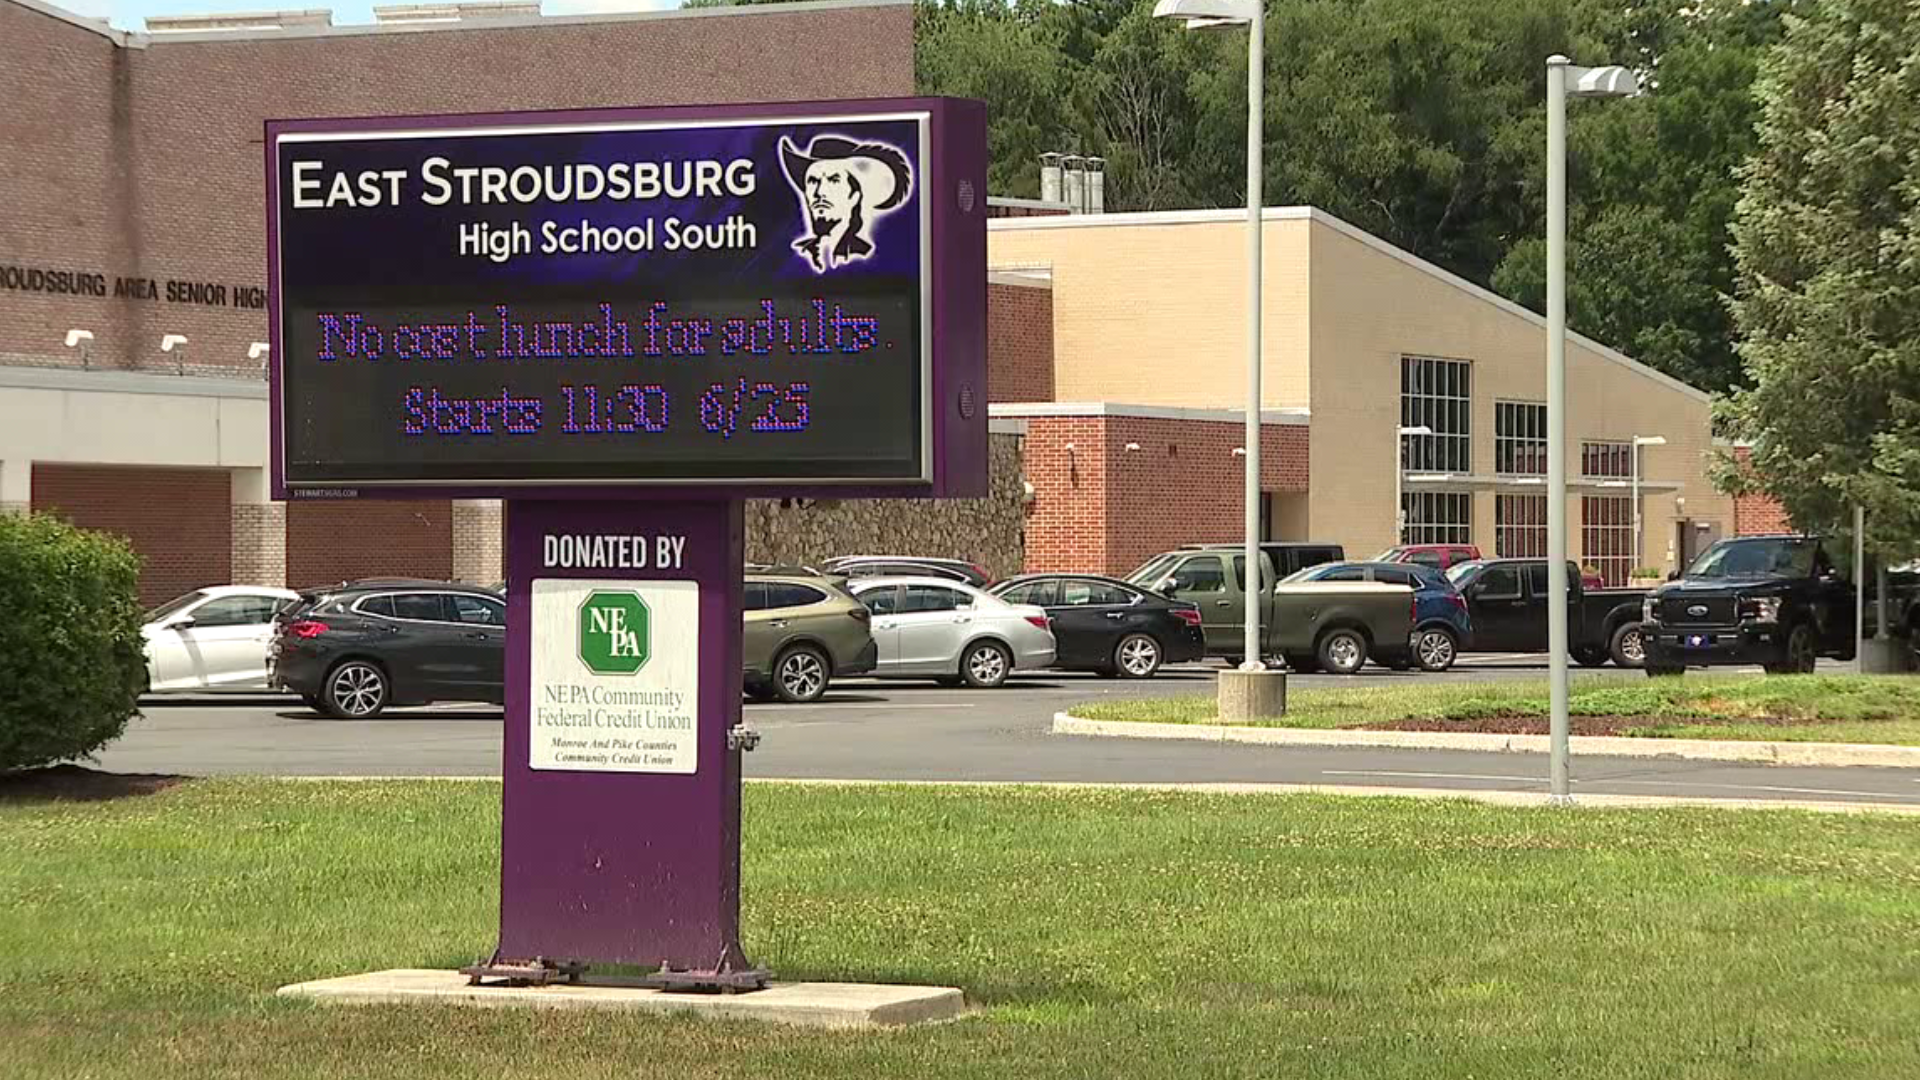 East Stroudsburg Area School District plans to welcome back staff and students in August. The school board will vote on safety plan next week.